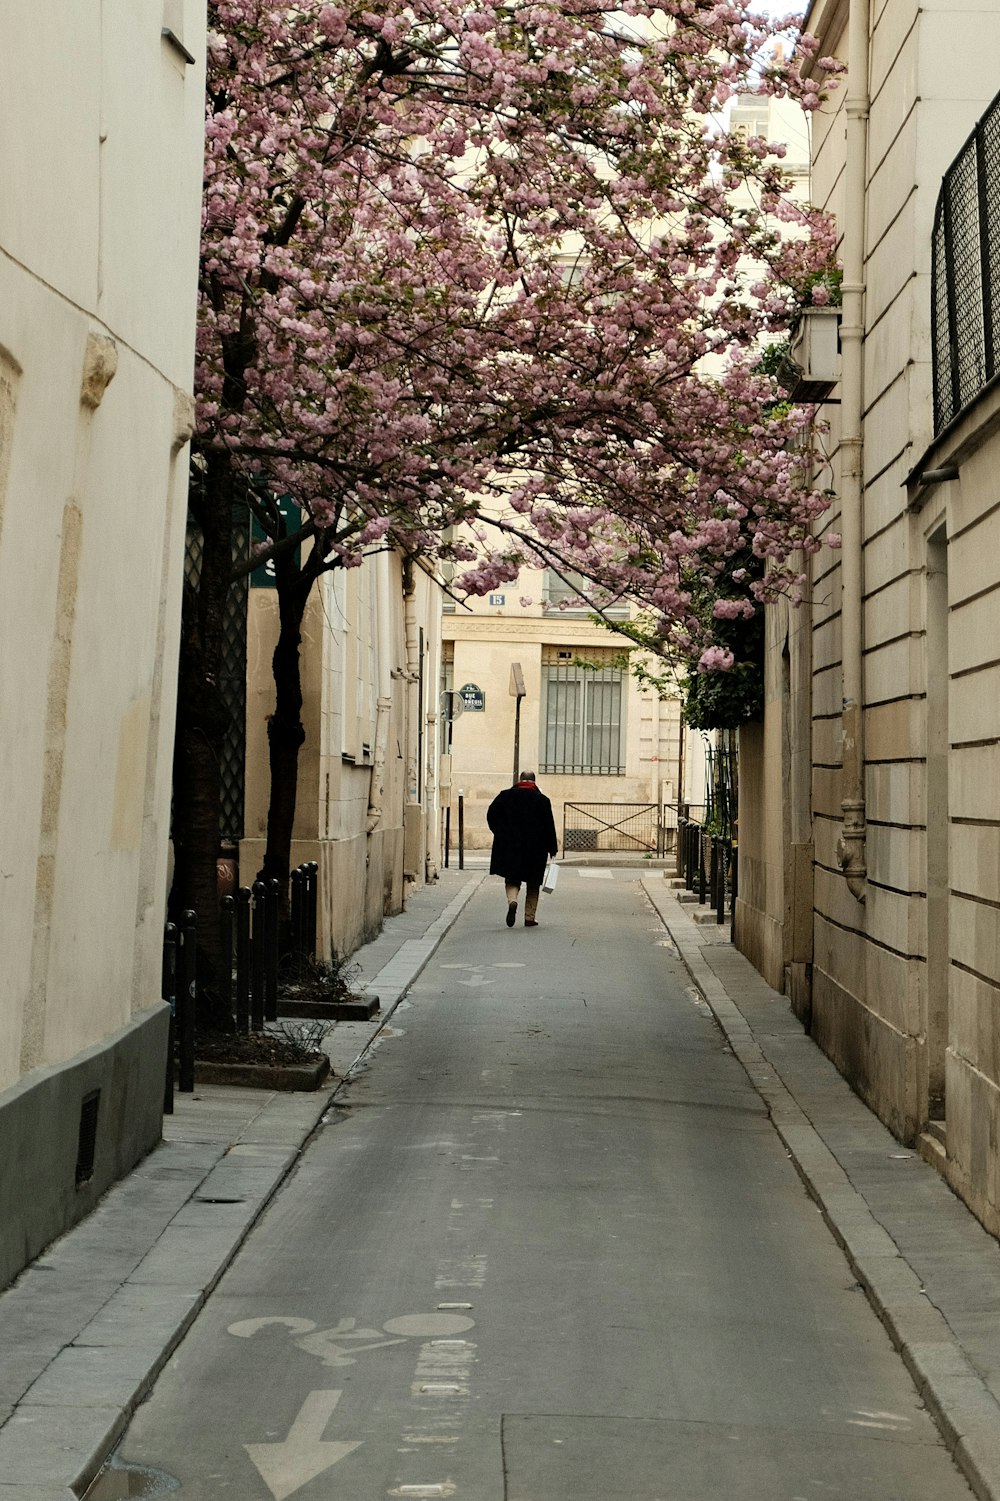 a person walking down a street under a tree